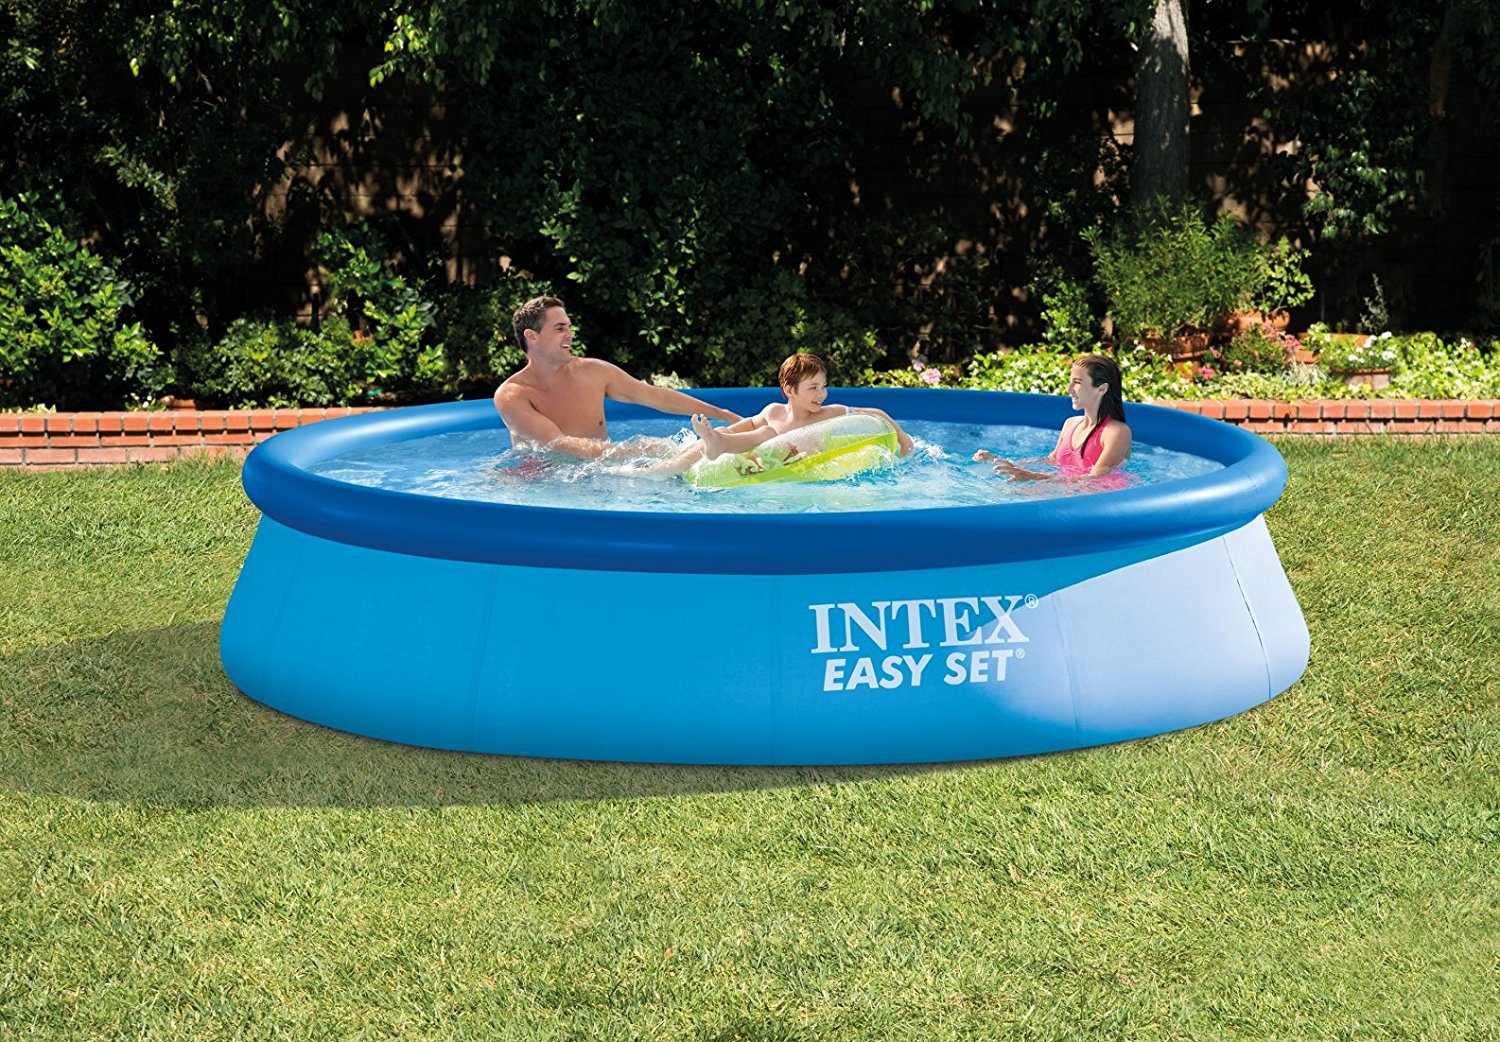 Intex 12ft X 30in Easy Set Pool Set with Filter Pump—$55.52 SHIPPED!